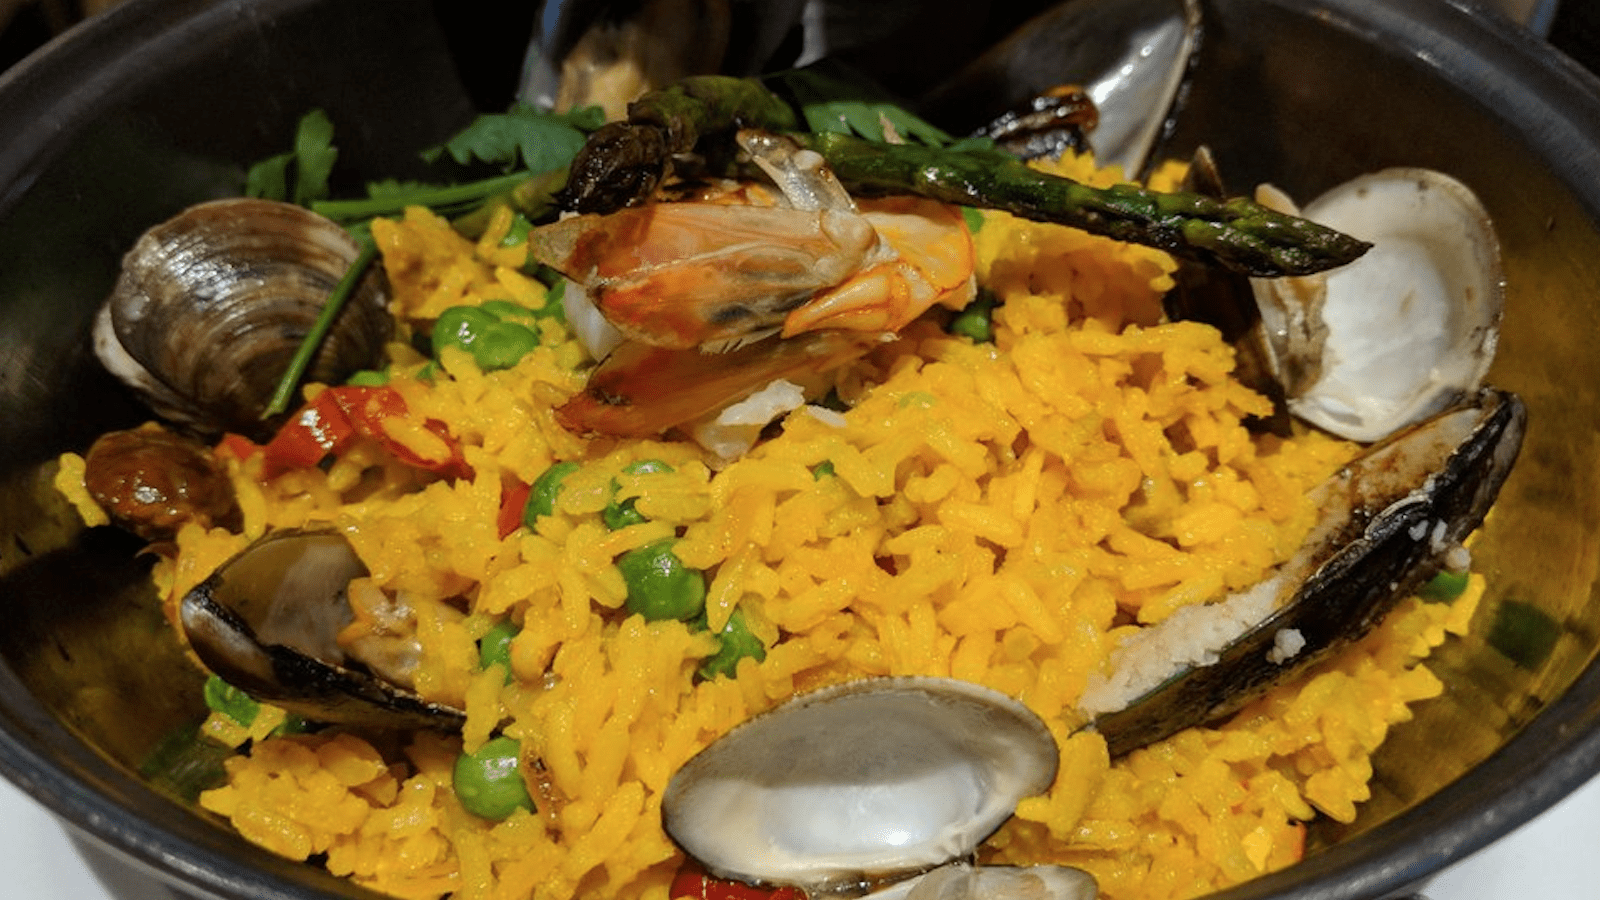 A vibrant dish of paella featuring bright yellow rice mixed with peas and red peppers. The dish, perfect for the best lunch on the Monterey Peninsula, is topped with clams, mussels, a shrimp, and garnished with a green herb and green beans.